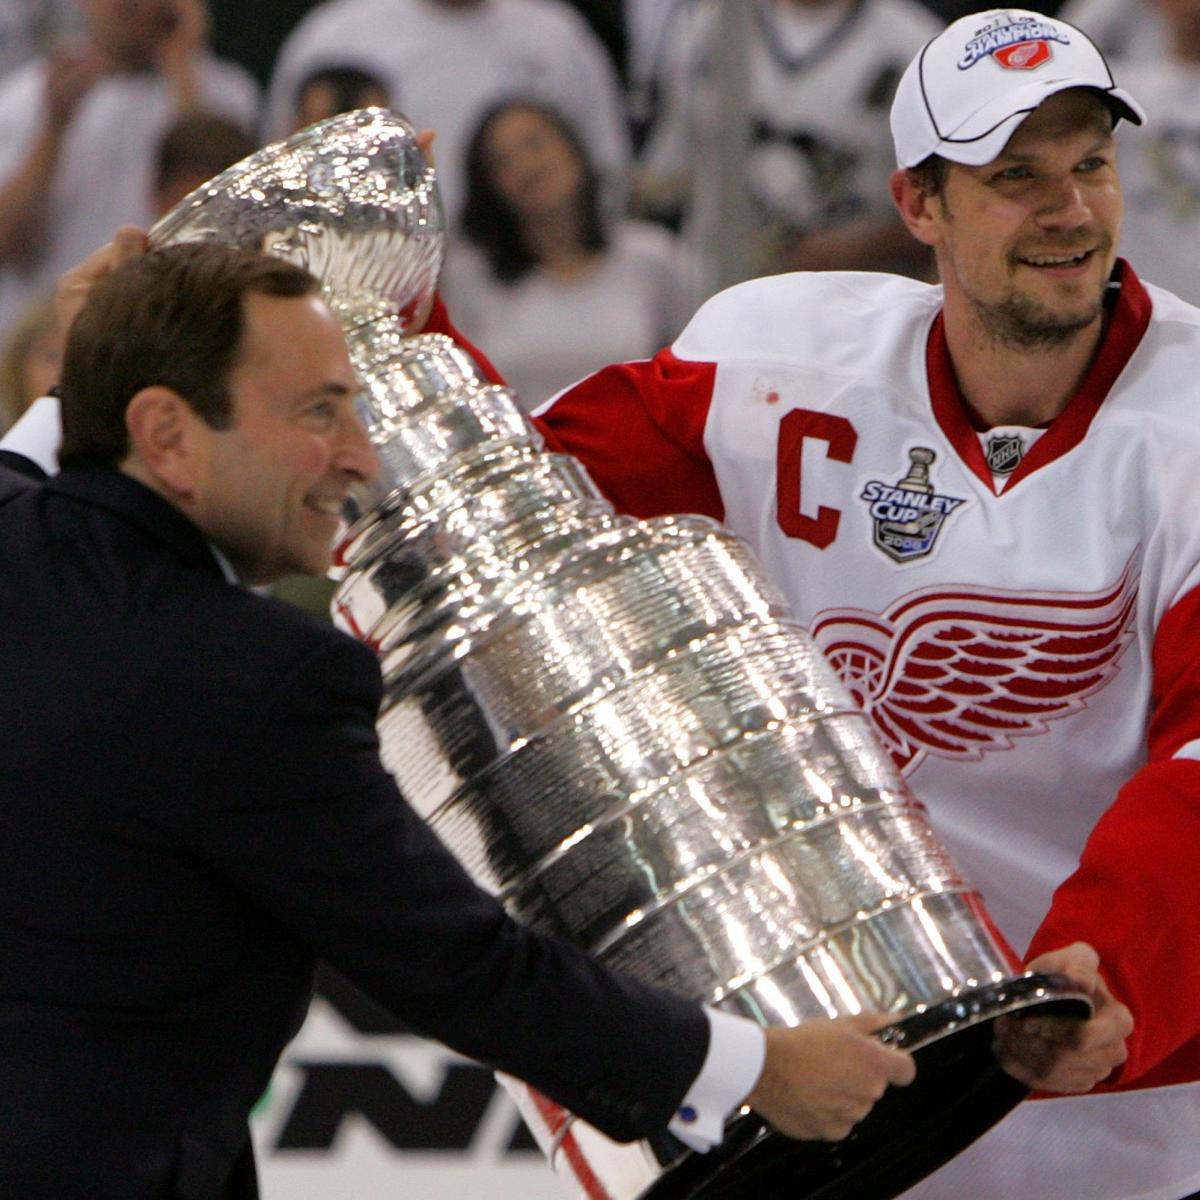 Players with the most Stanley Cup wins